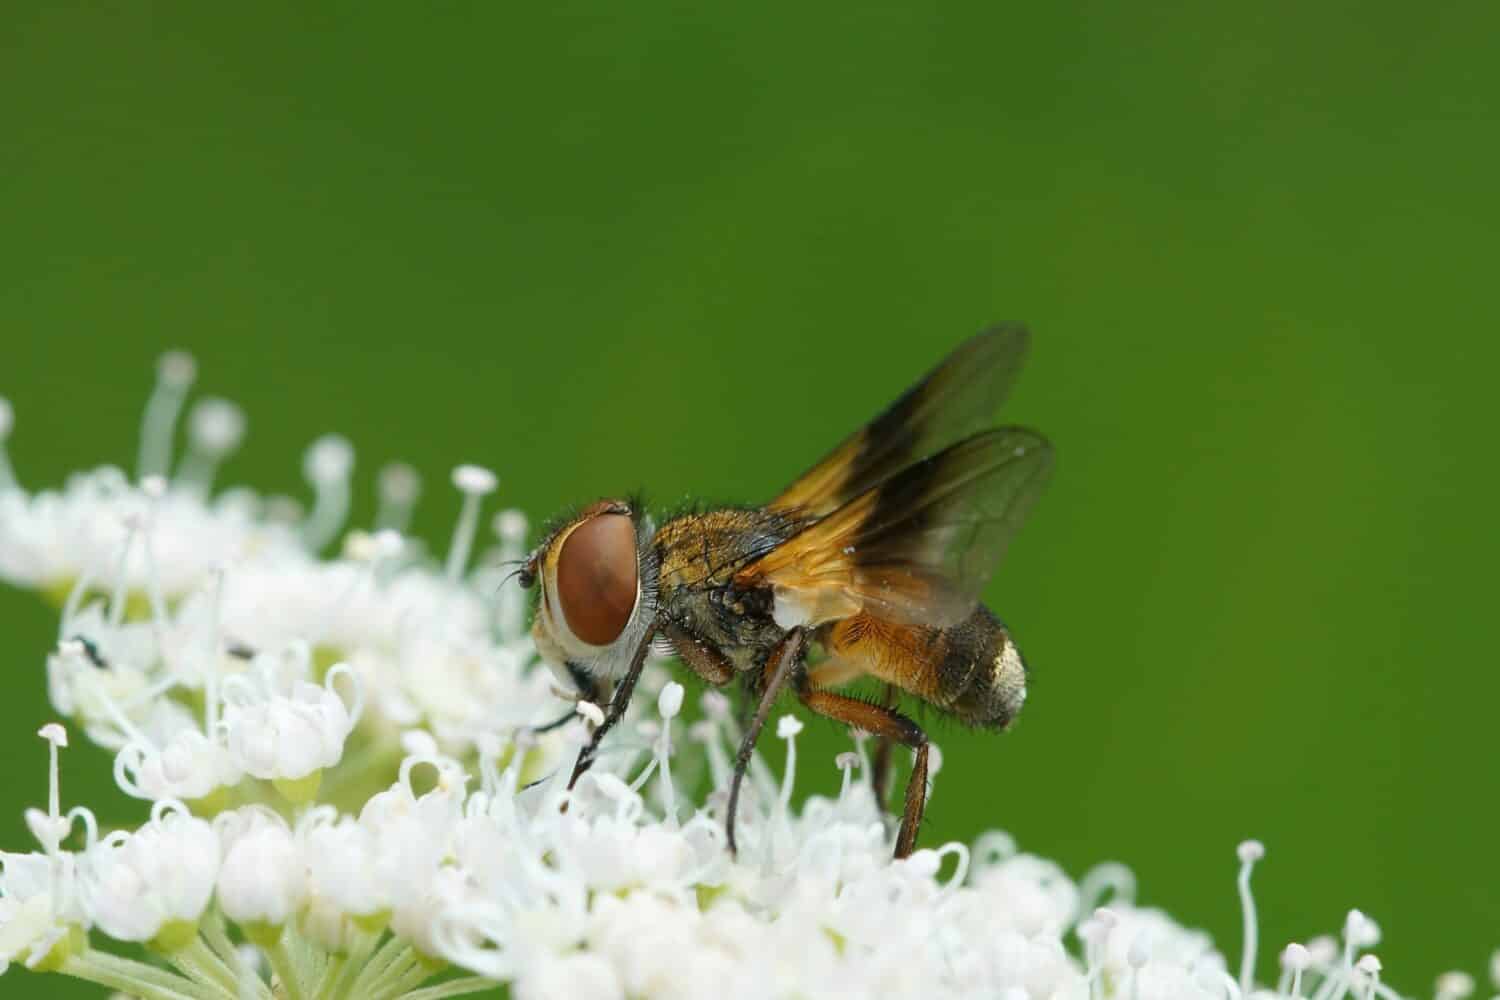 Natural detailed closeup on a colorful Tachinid fly, Ectophasia crassipennis, on a white flower